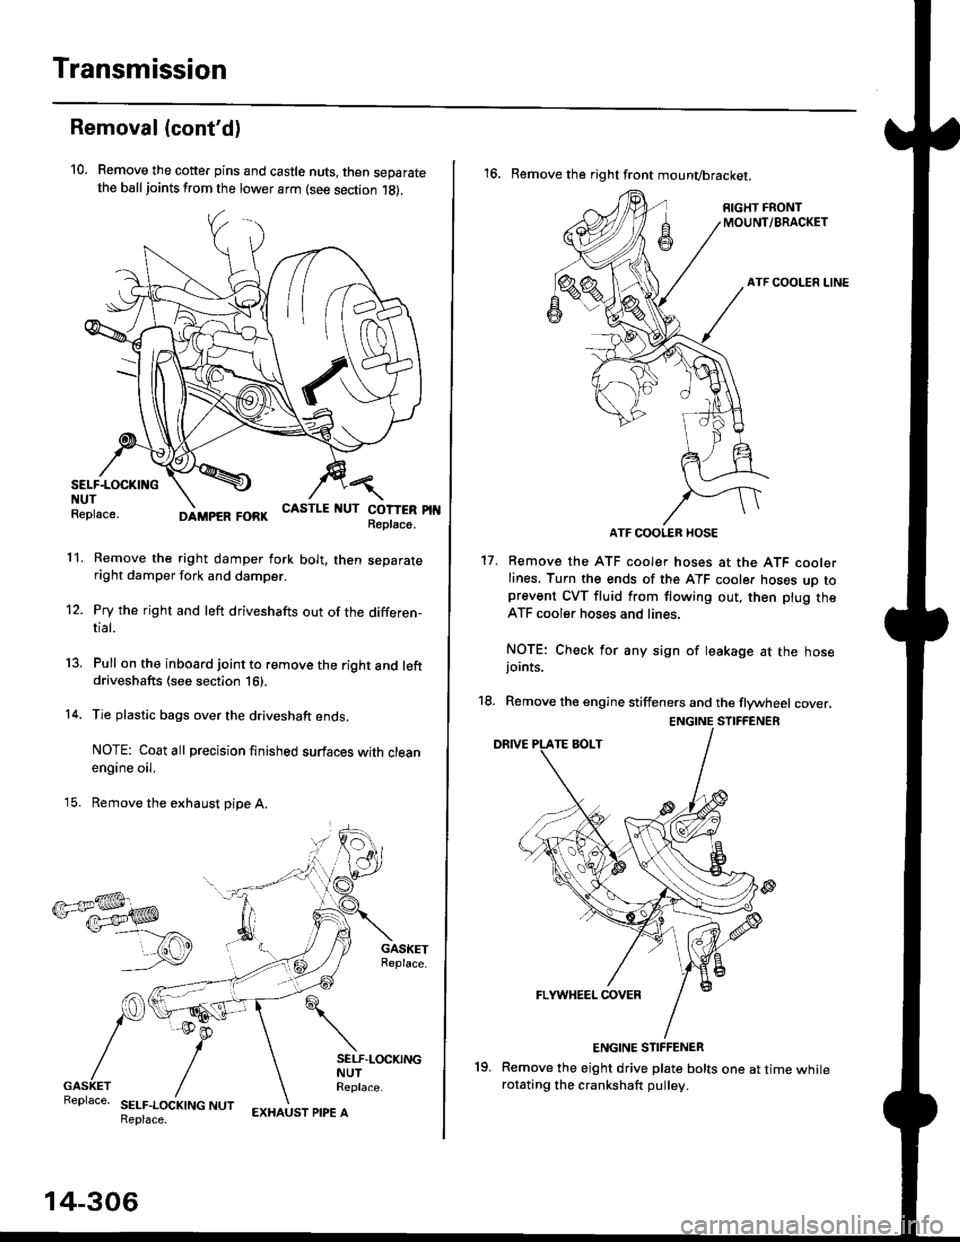 HONDA CIVIC 1996 6.G Workshop Manual Transmission
Removal (contd)
10. Remove the cotte. pins and castle nuts, then separatethe ball joints from the lower arm (see section 1g).
SELF-LOCKING  -=V,
NUT \Replace. oitupea rOax
Remove the rig